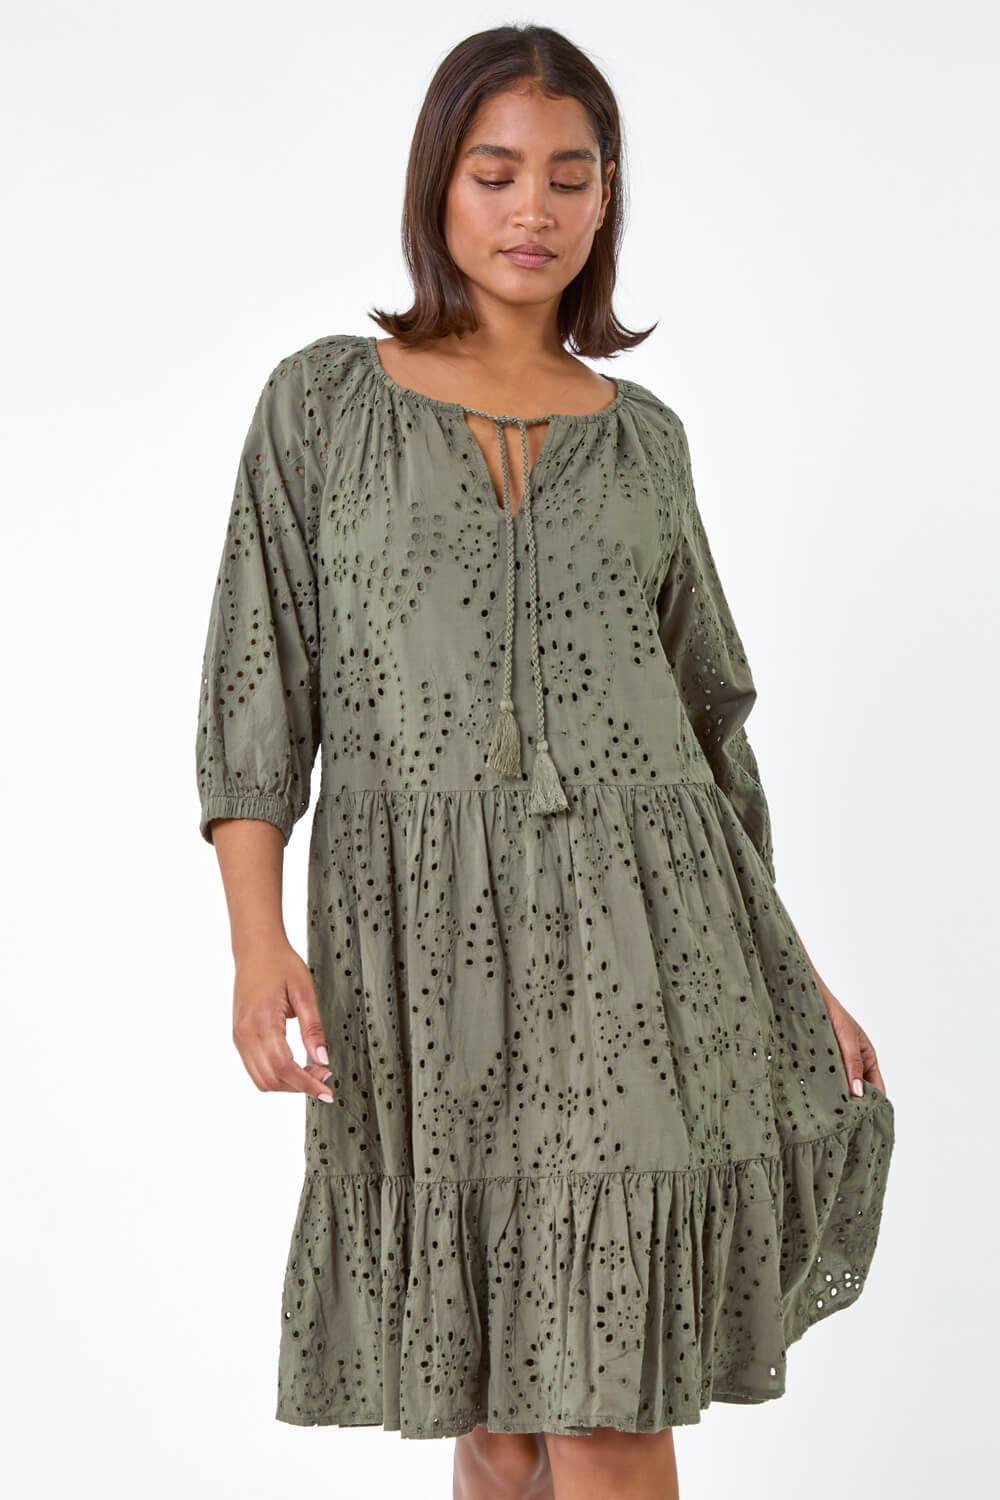 KHAKI Cotton Broderie Tiered Smock Dress, Image 4 of 7